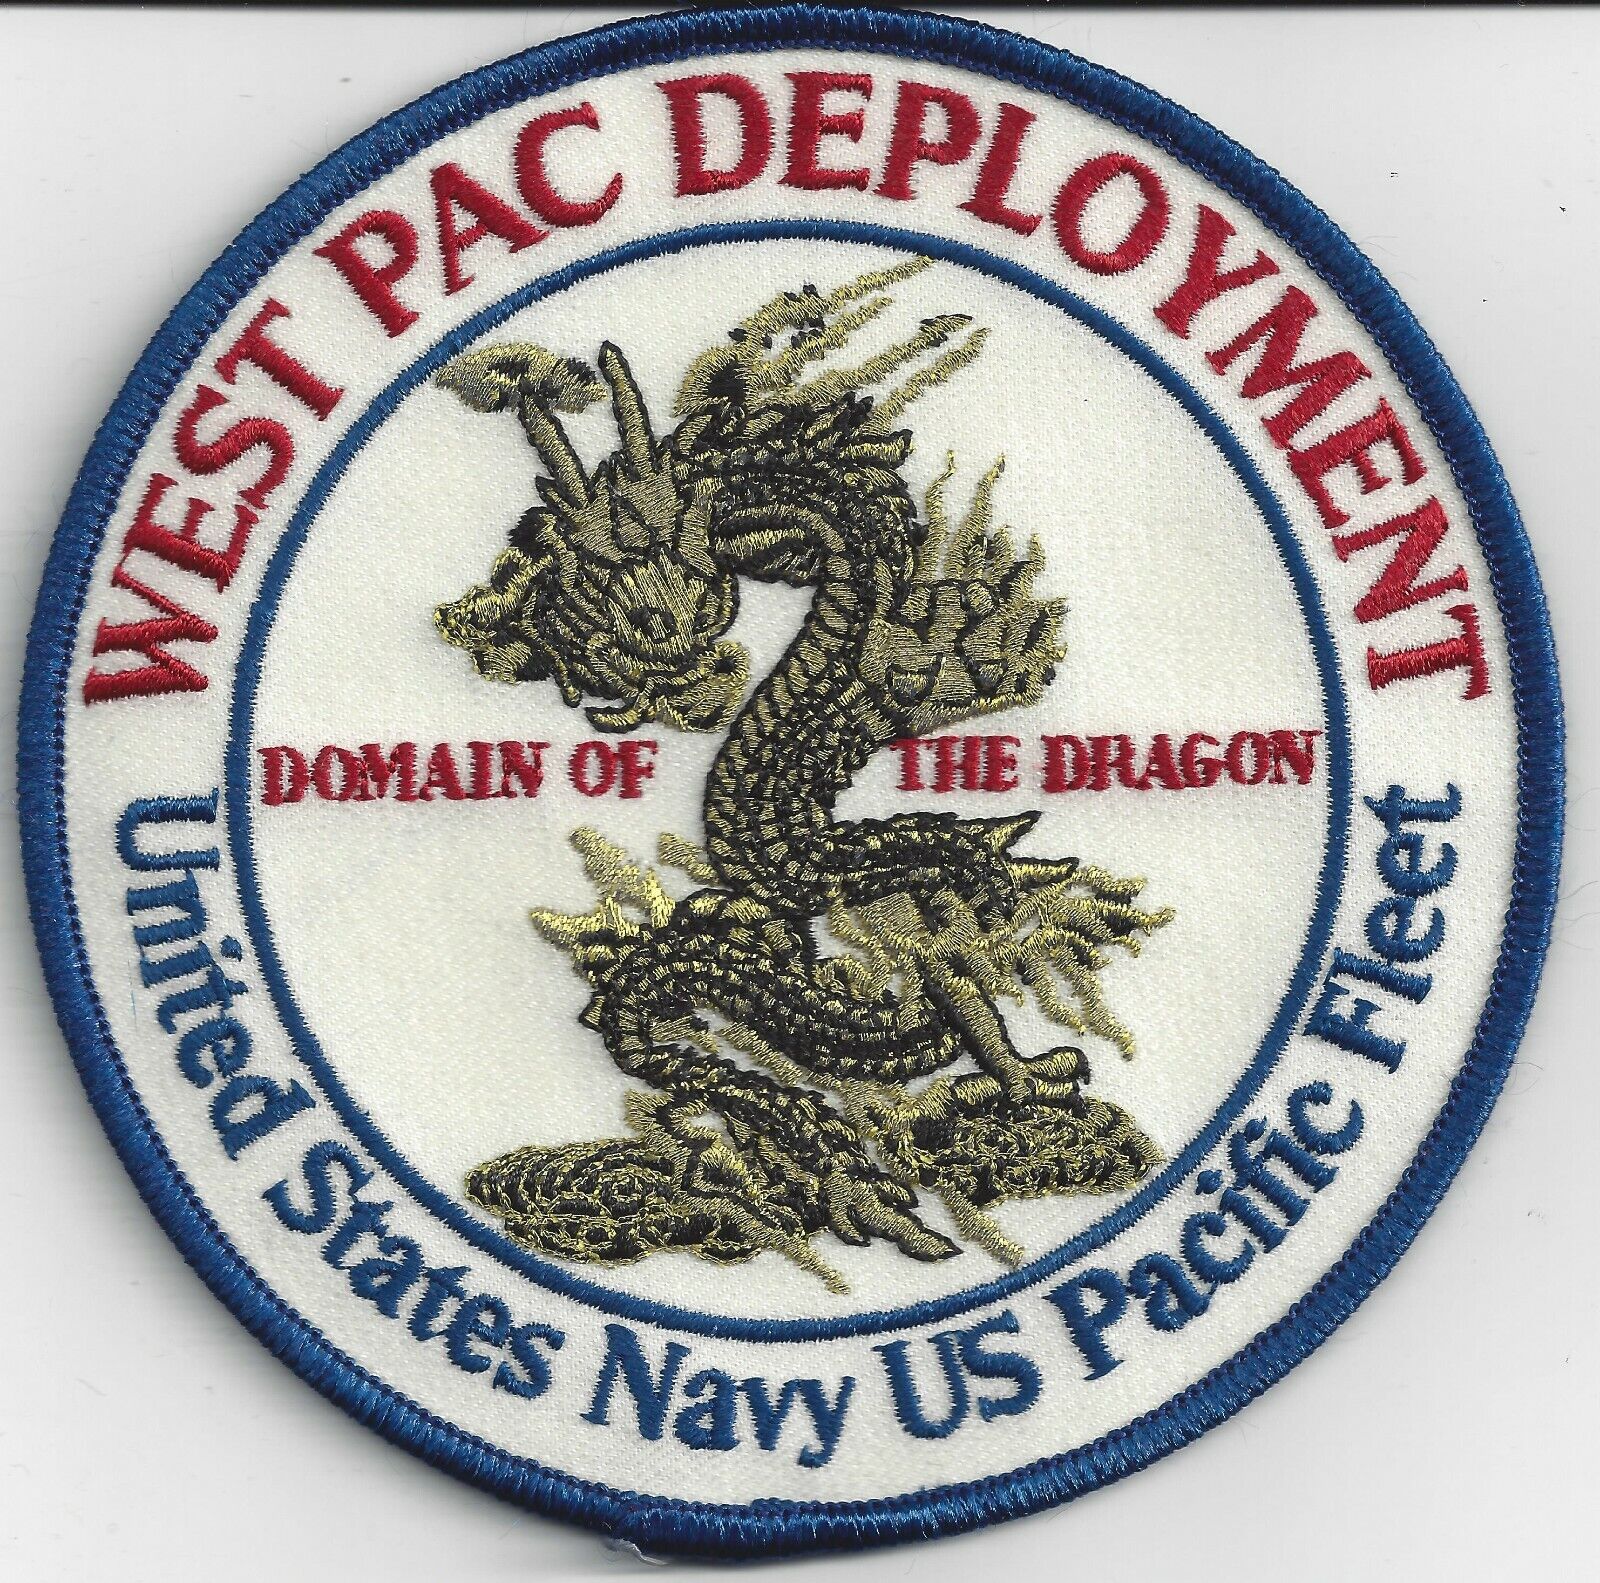 West Pac Deployment Domain of the Dragon - Copyrighted - c6170 - 5 inch EonT